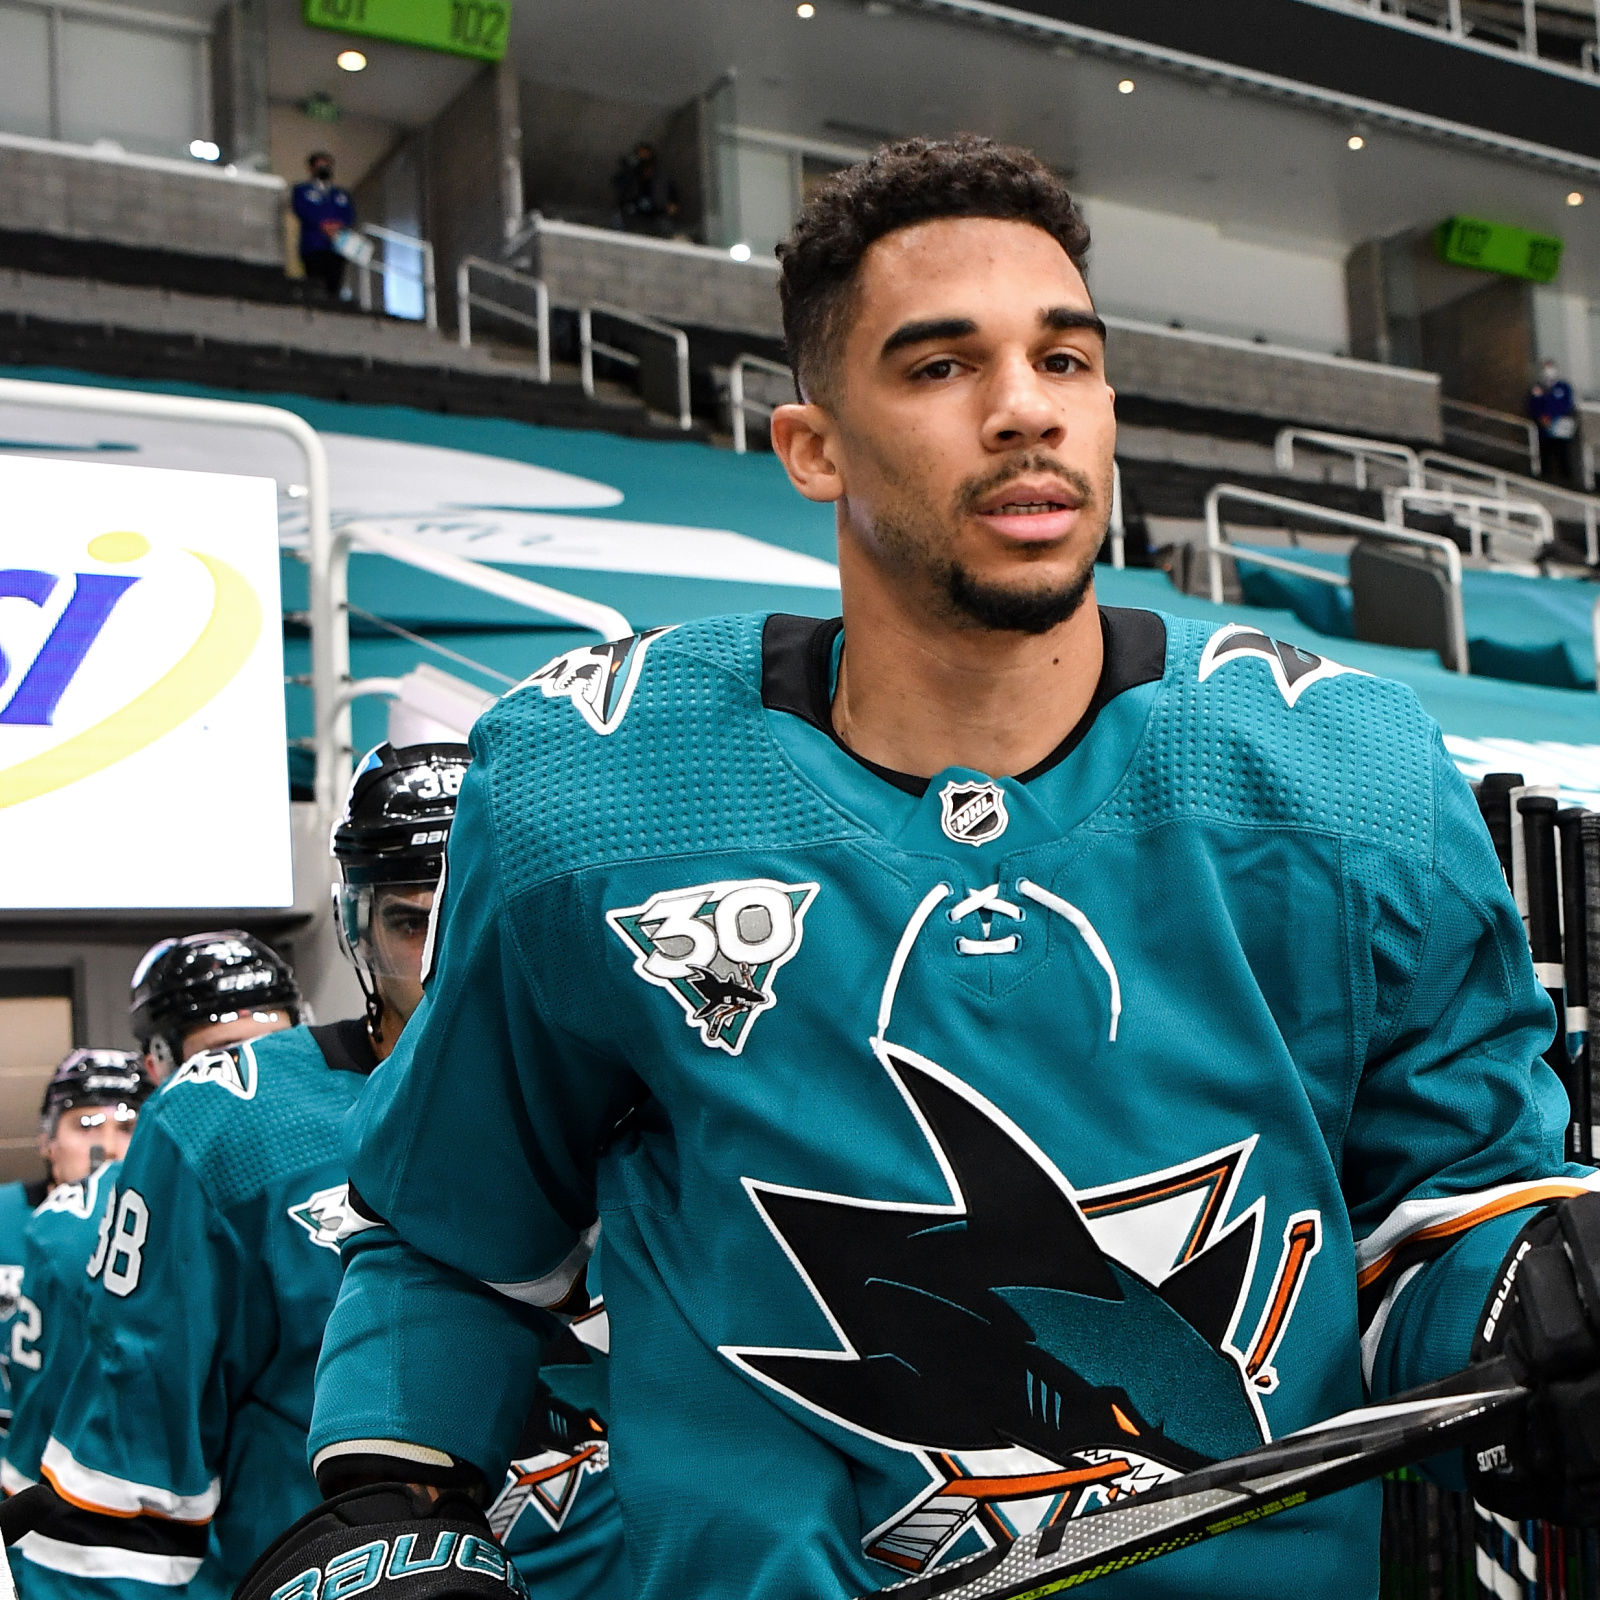 Sharks coach reportedly tried to fight Evander Kane in team locker room -  HockeyFeed